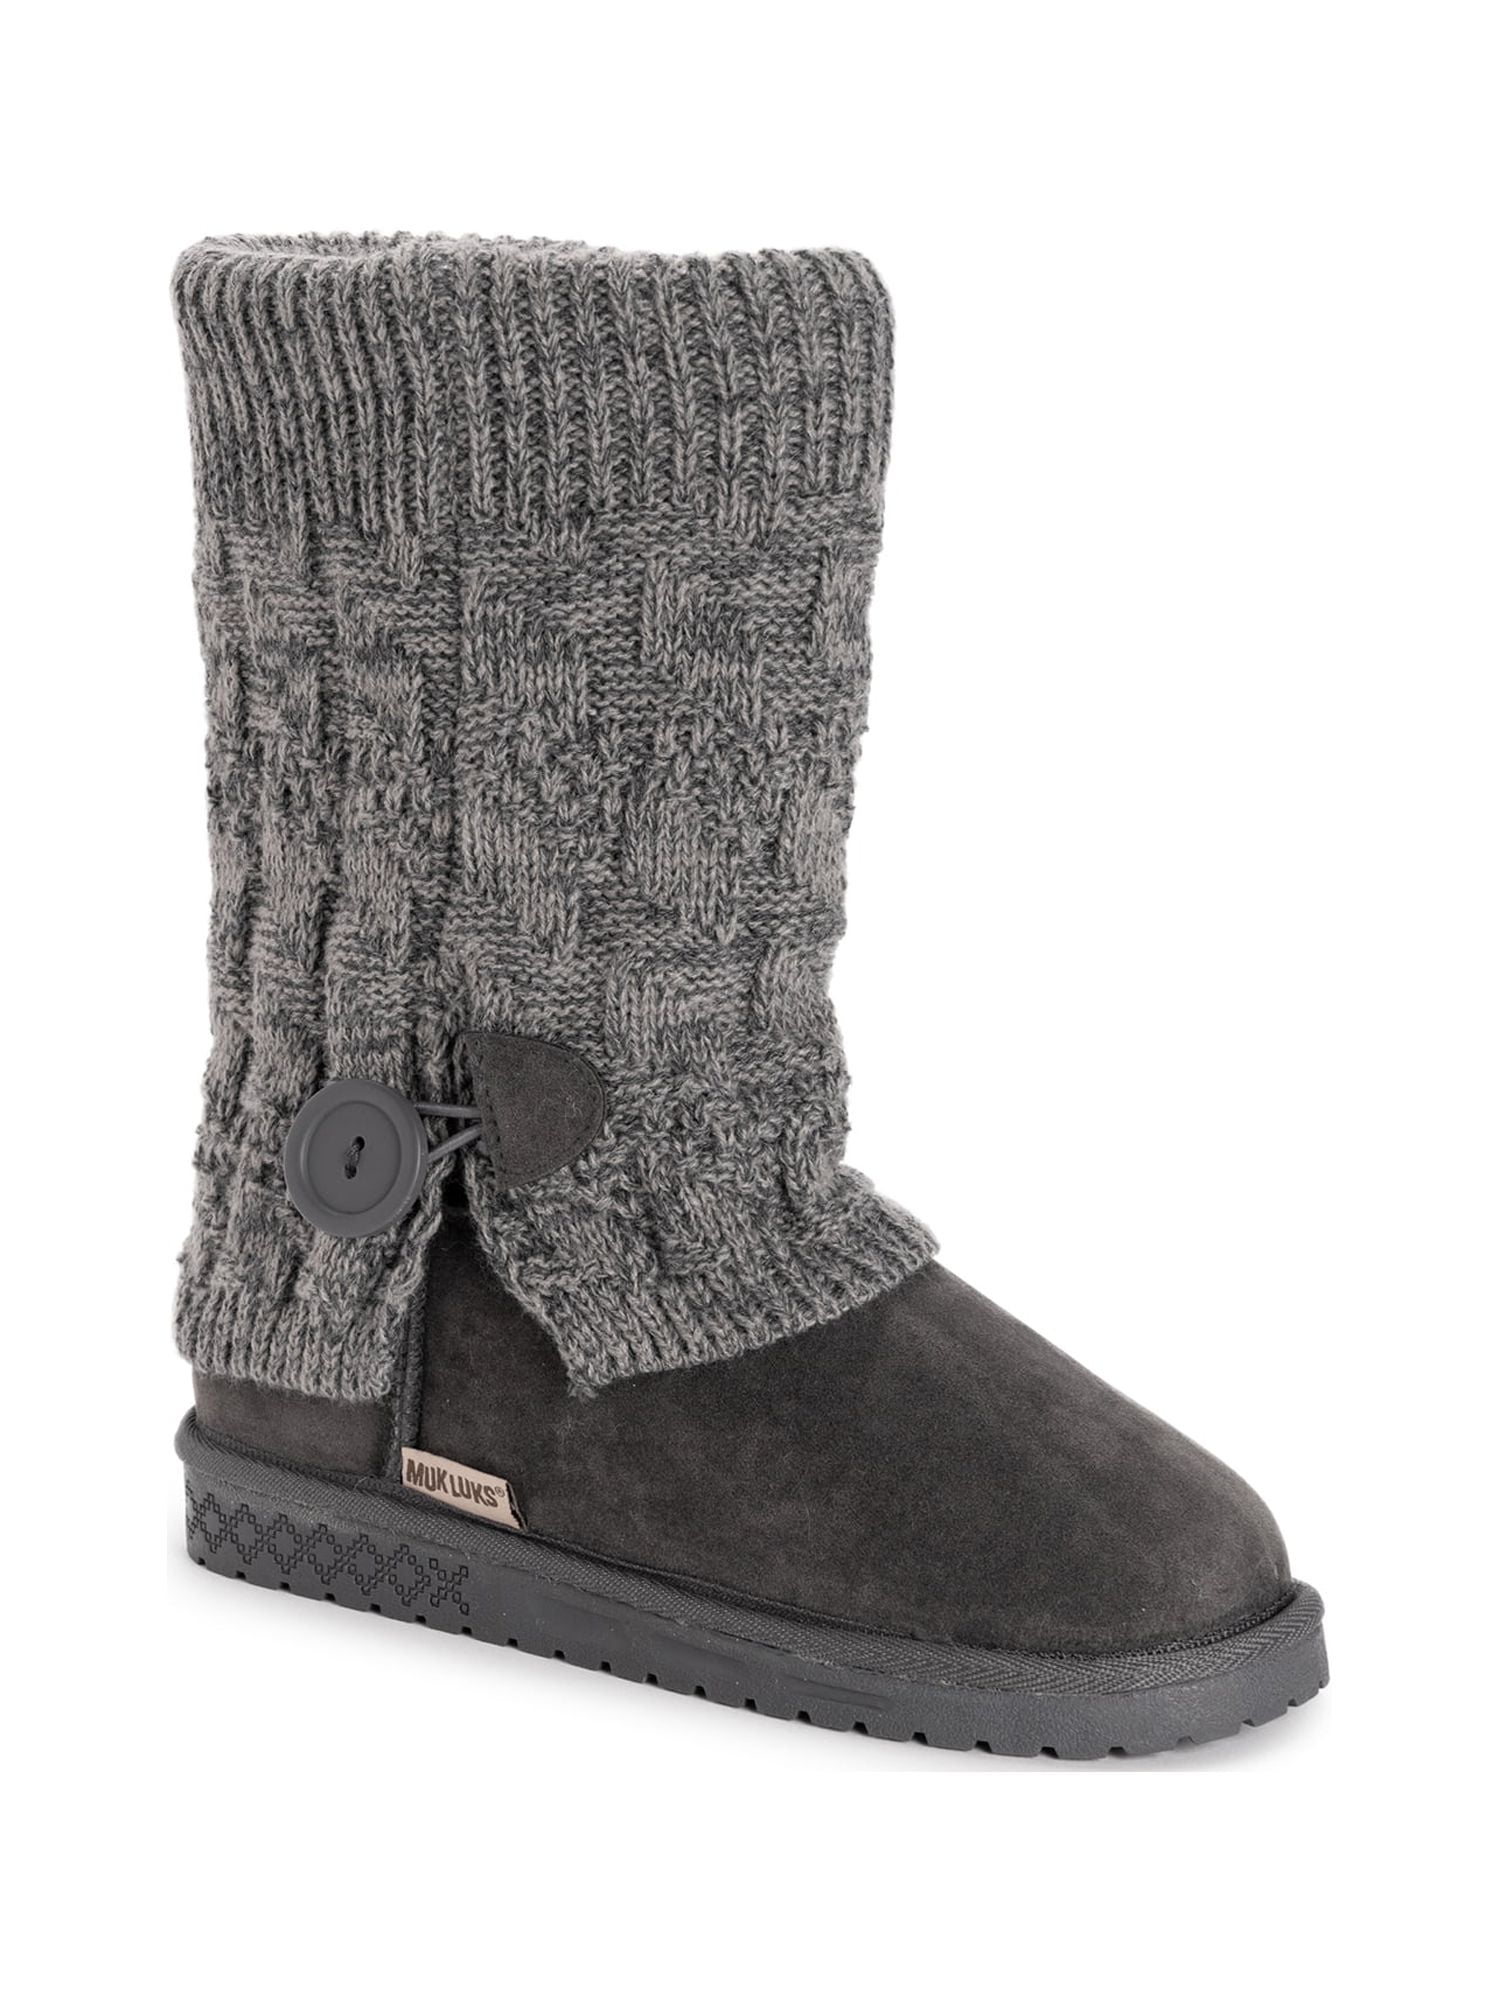 Muk Luks Women's Janie Side Button Cable Knit Boot-Wide Width Available ...